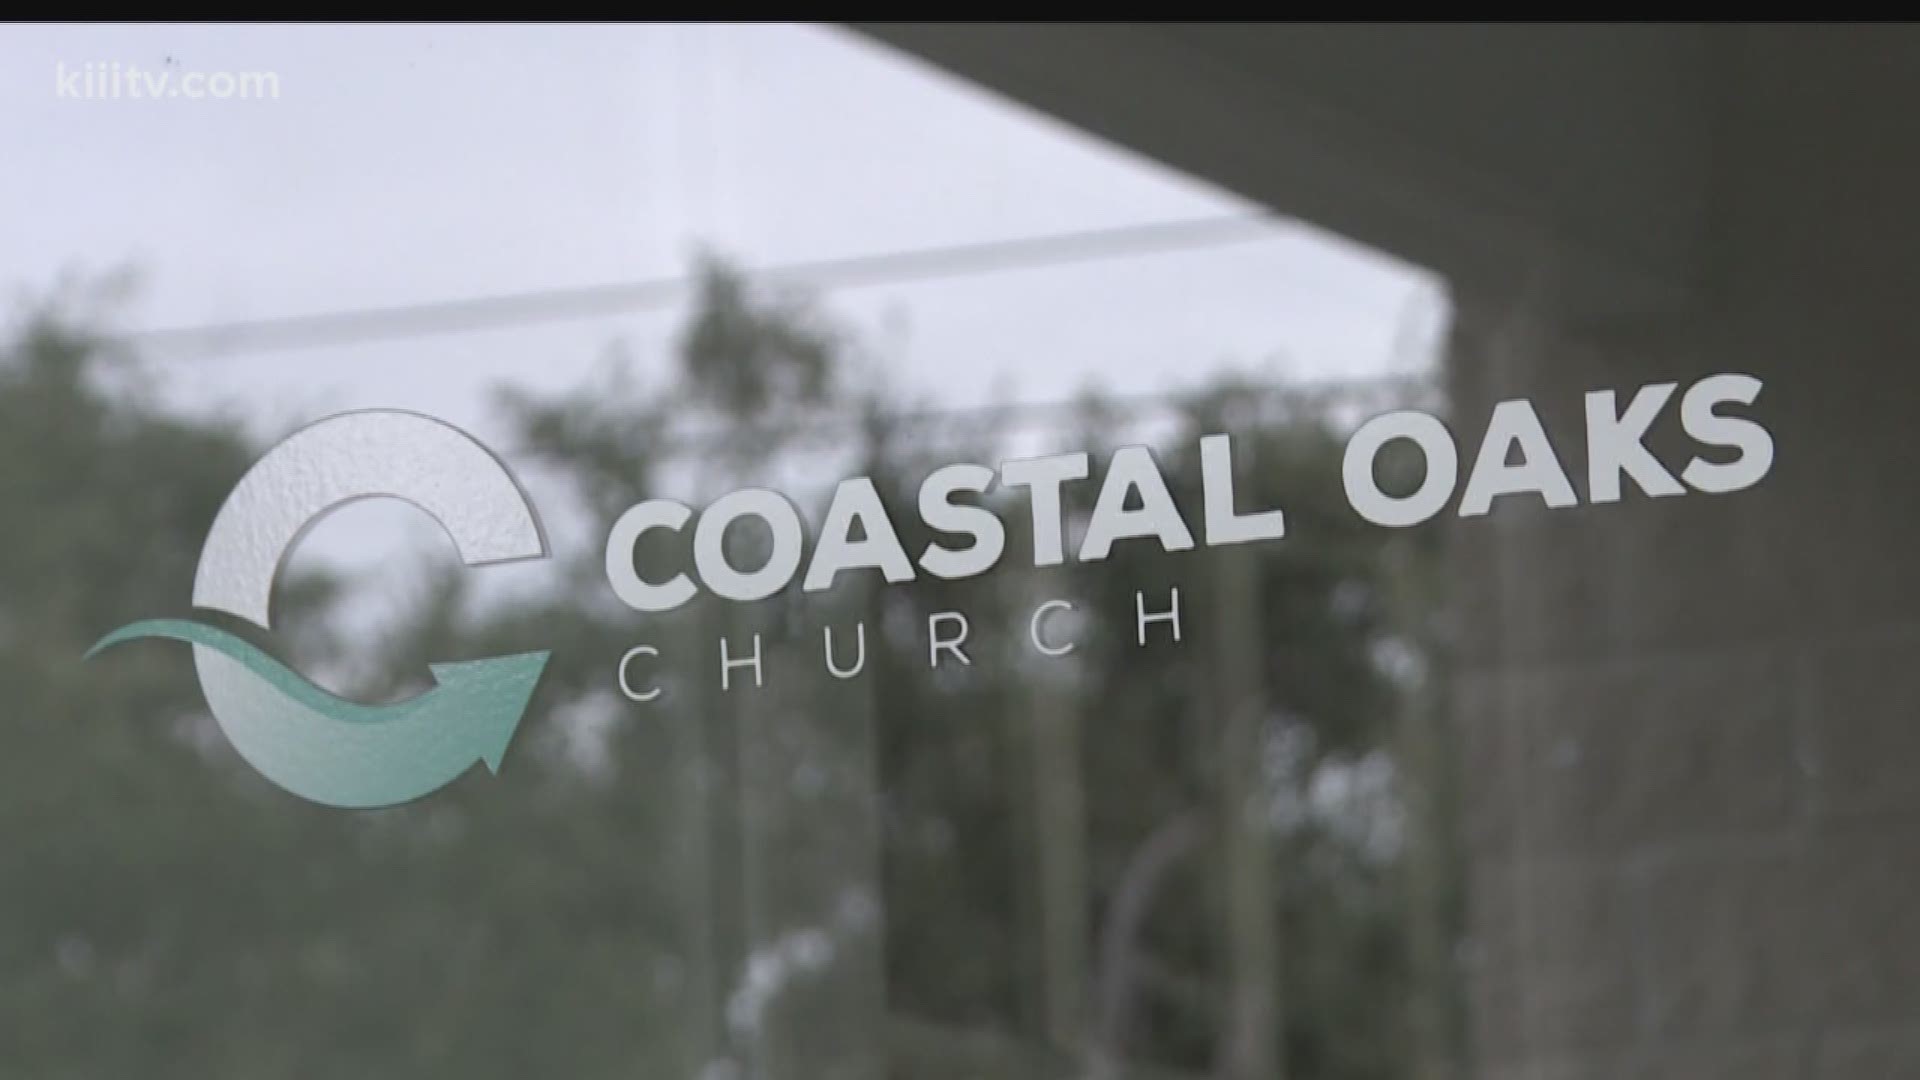 More than a year after Hurricane Harvey, the Coastal Oaks Church in Rockport is gathering supplies to send to one of the hardest hit areas in Central Texas.